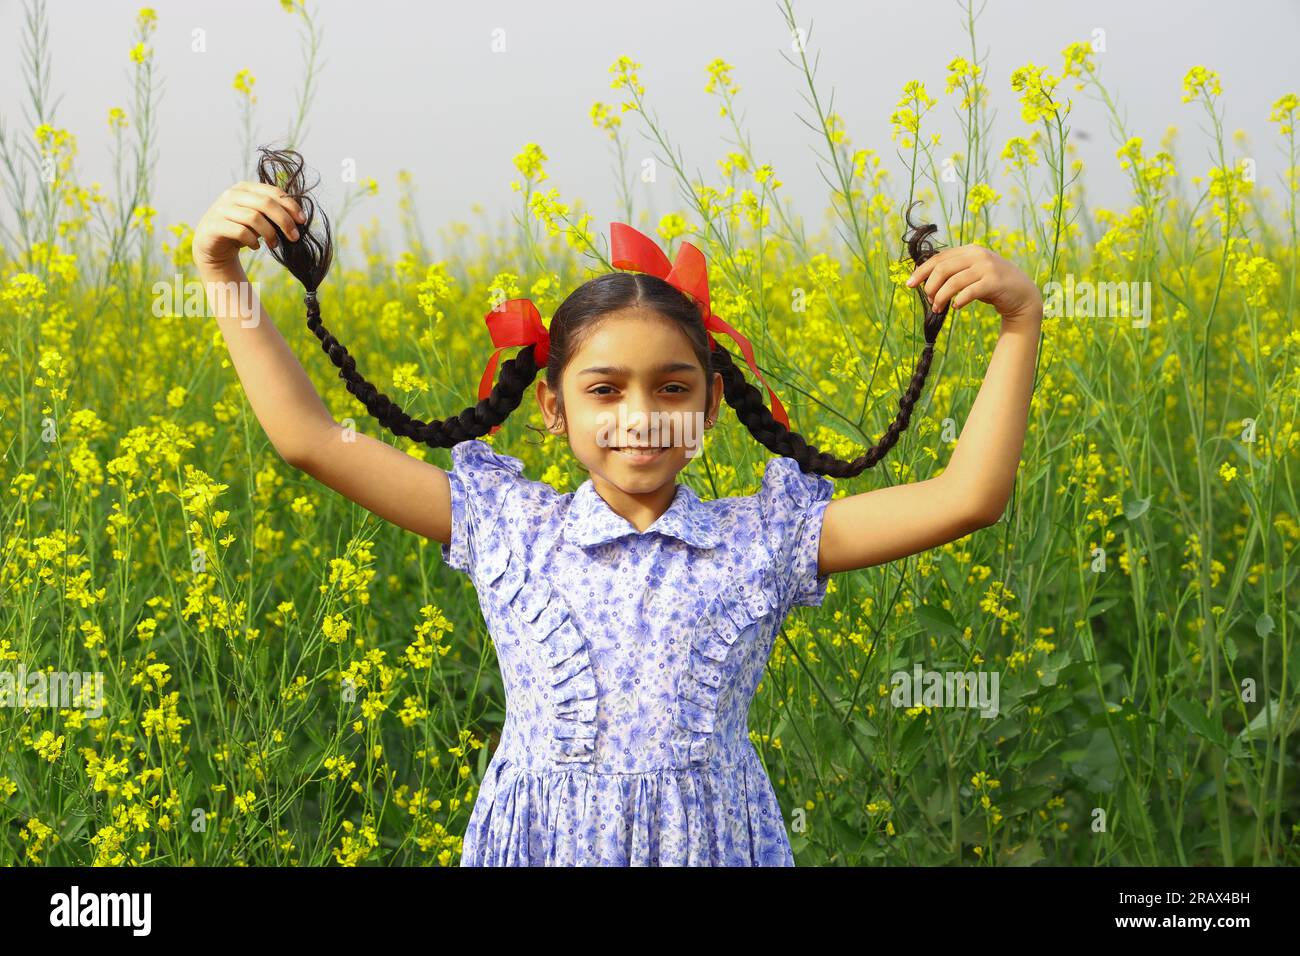 Happy rural Indian girl child standing in a beautiful mustard field filled with gorgeous yellow colored flowers Stock Photo